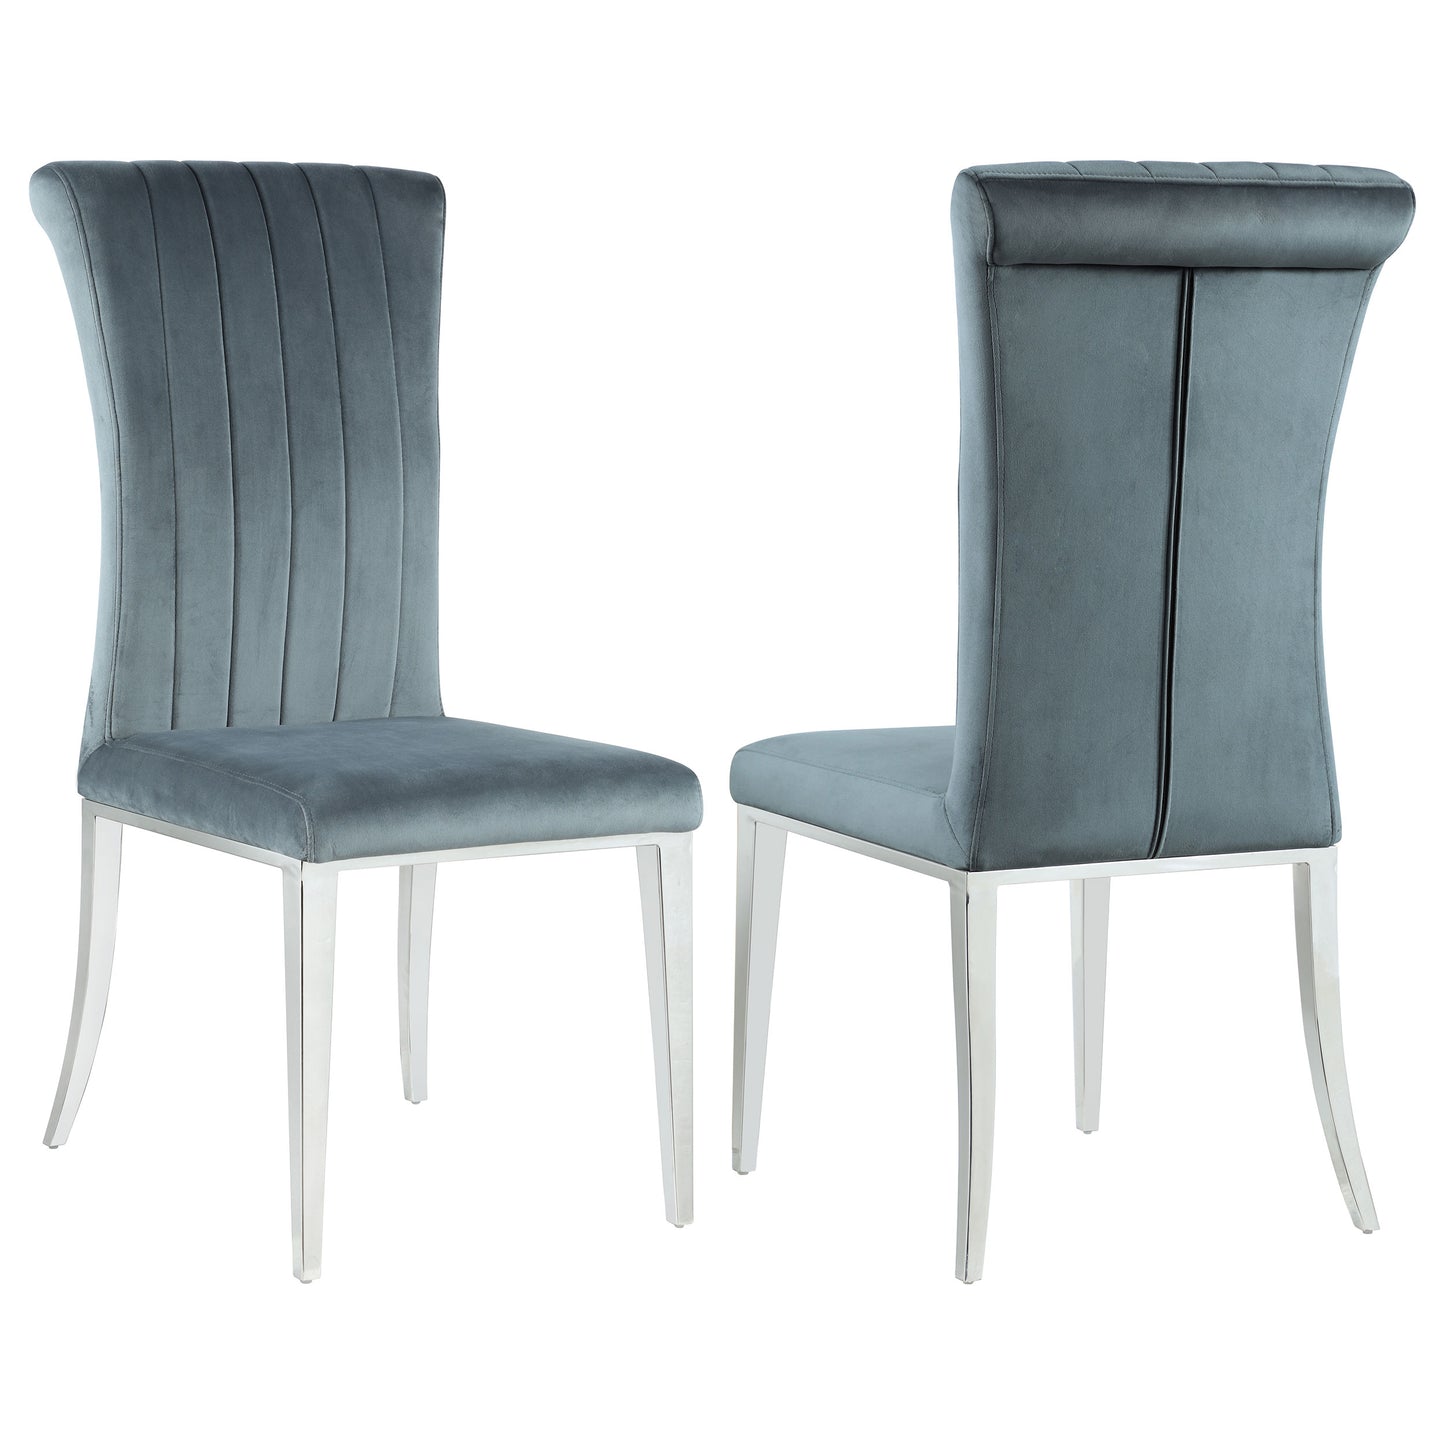 Beaufort Upholstered Curved Back Side Chairs Dark Grey (Set of 2)